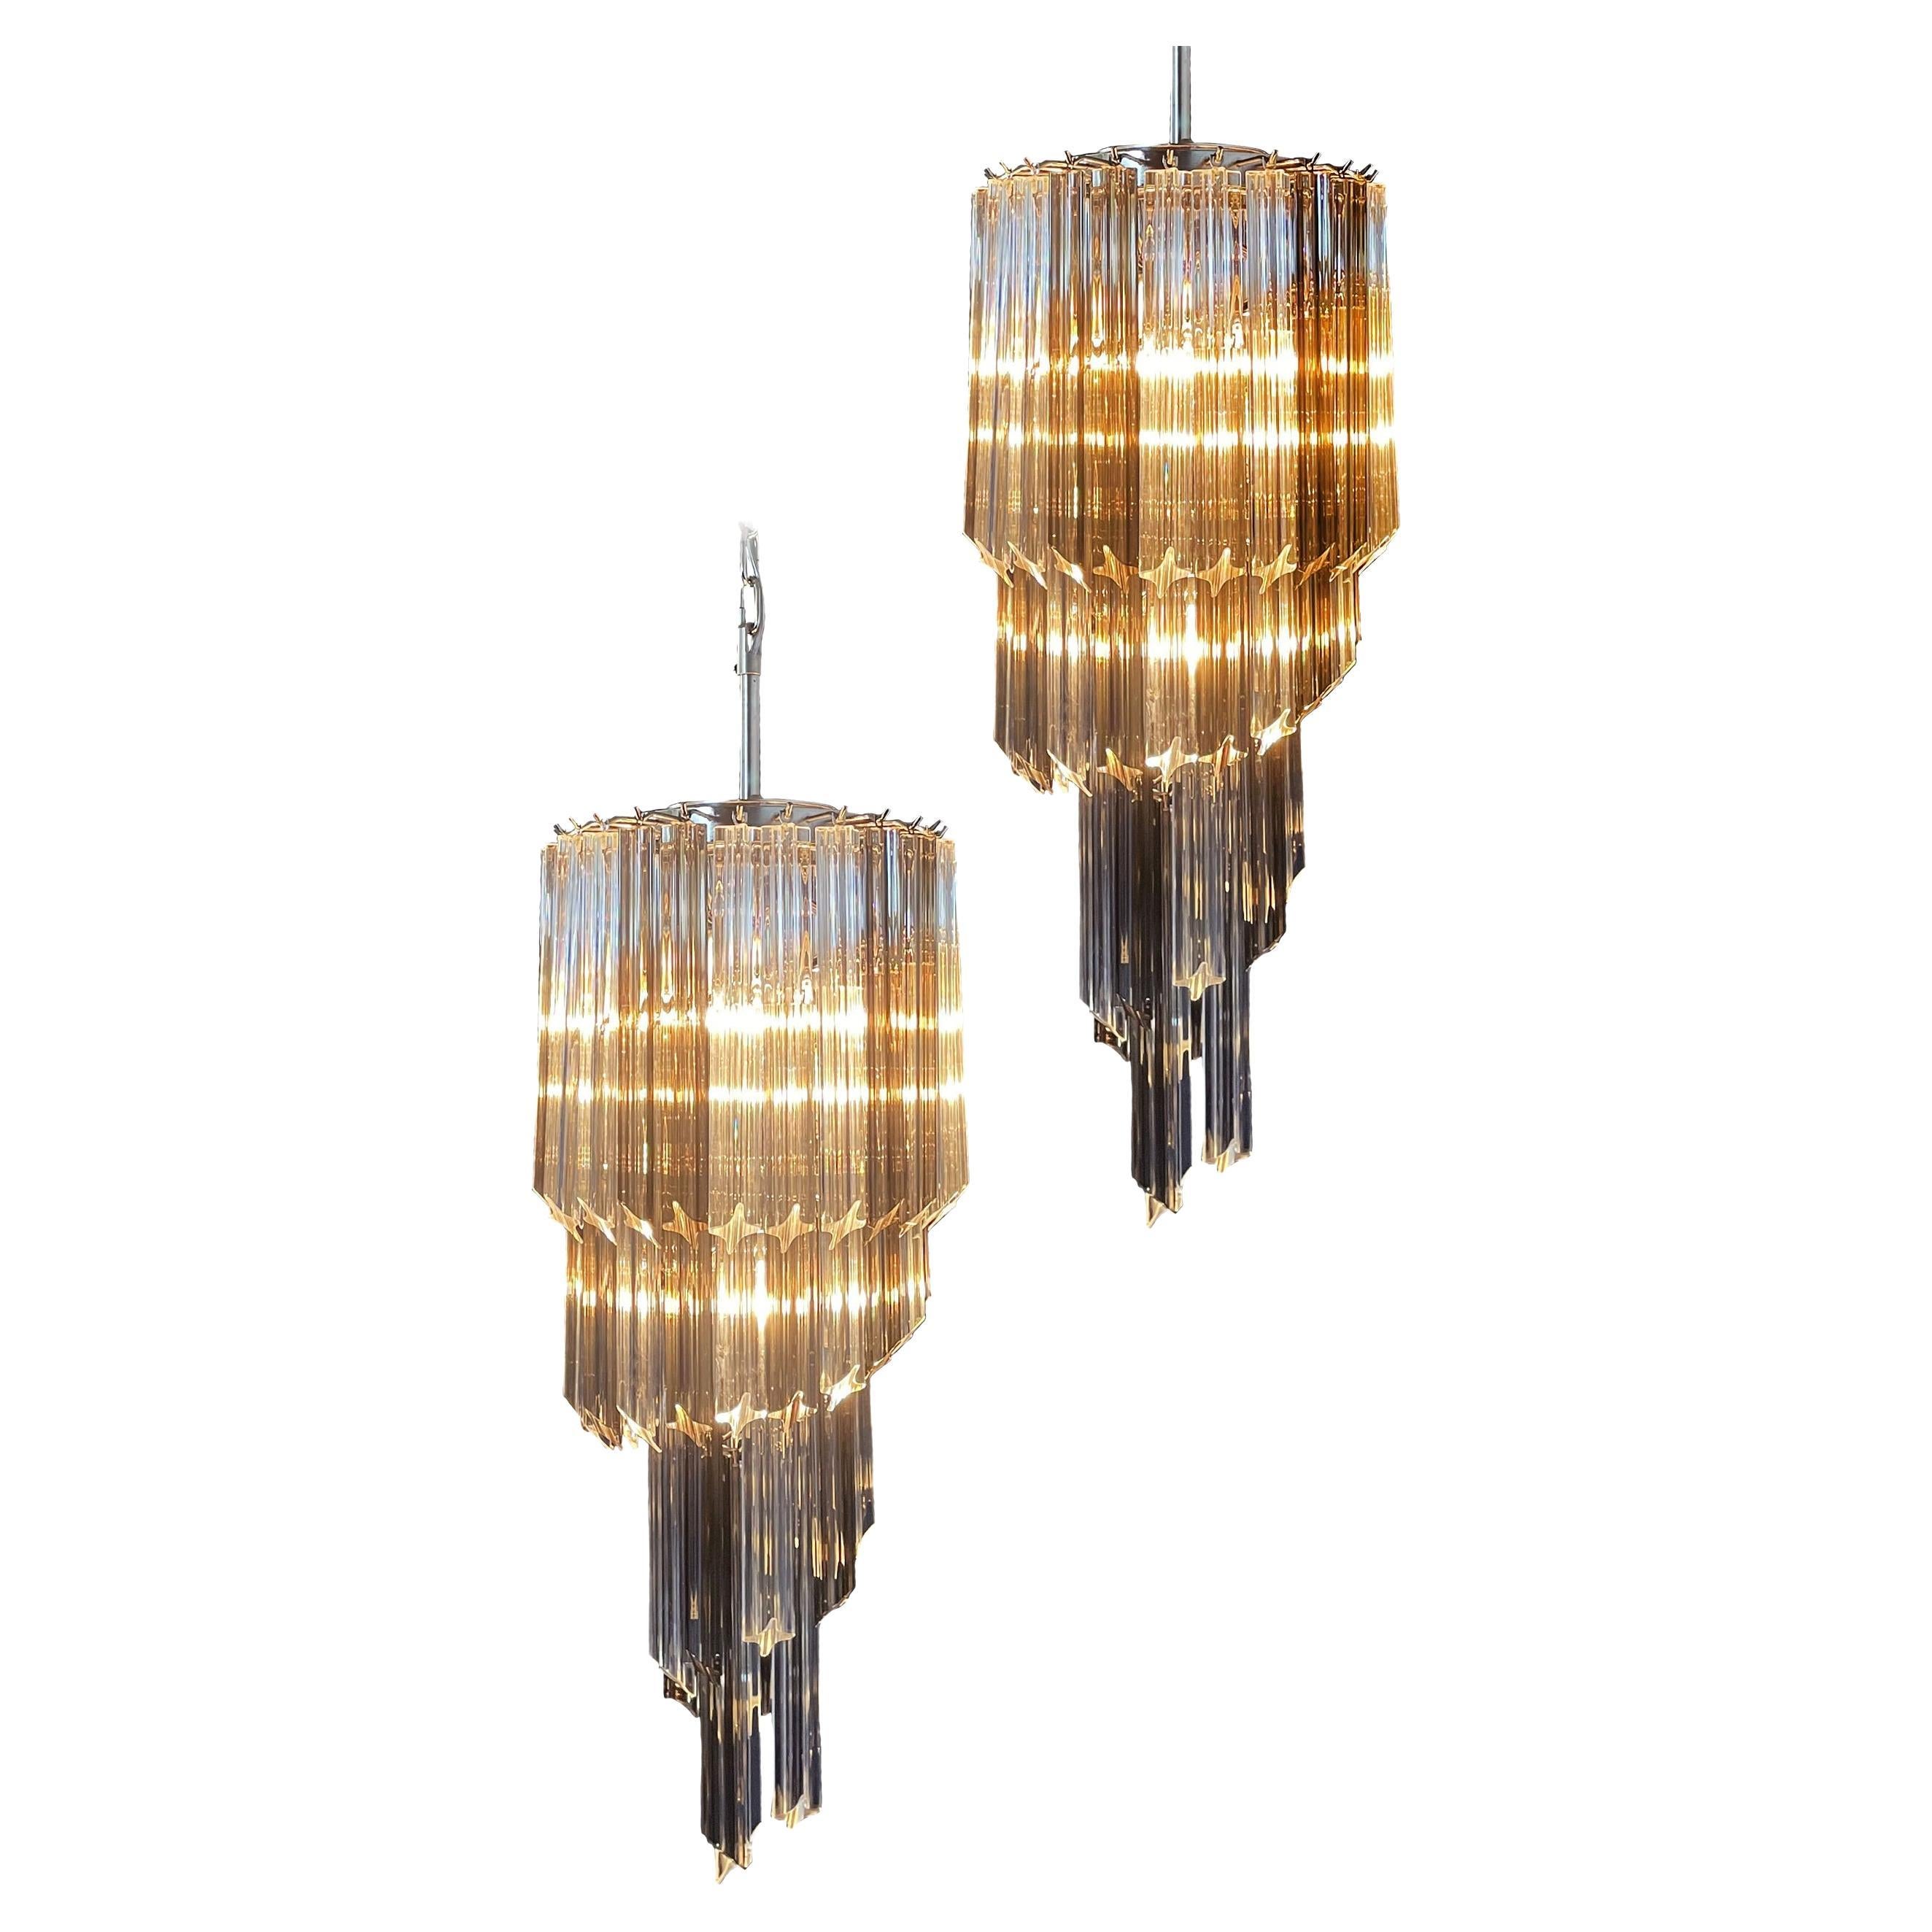 Sophisticated Murano Chandeliers – 54 quadriedri prisms transparent and smoked For Sale